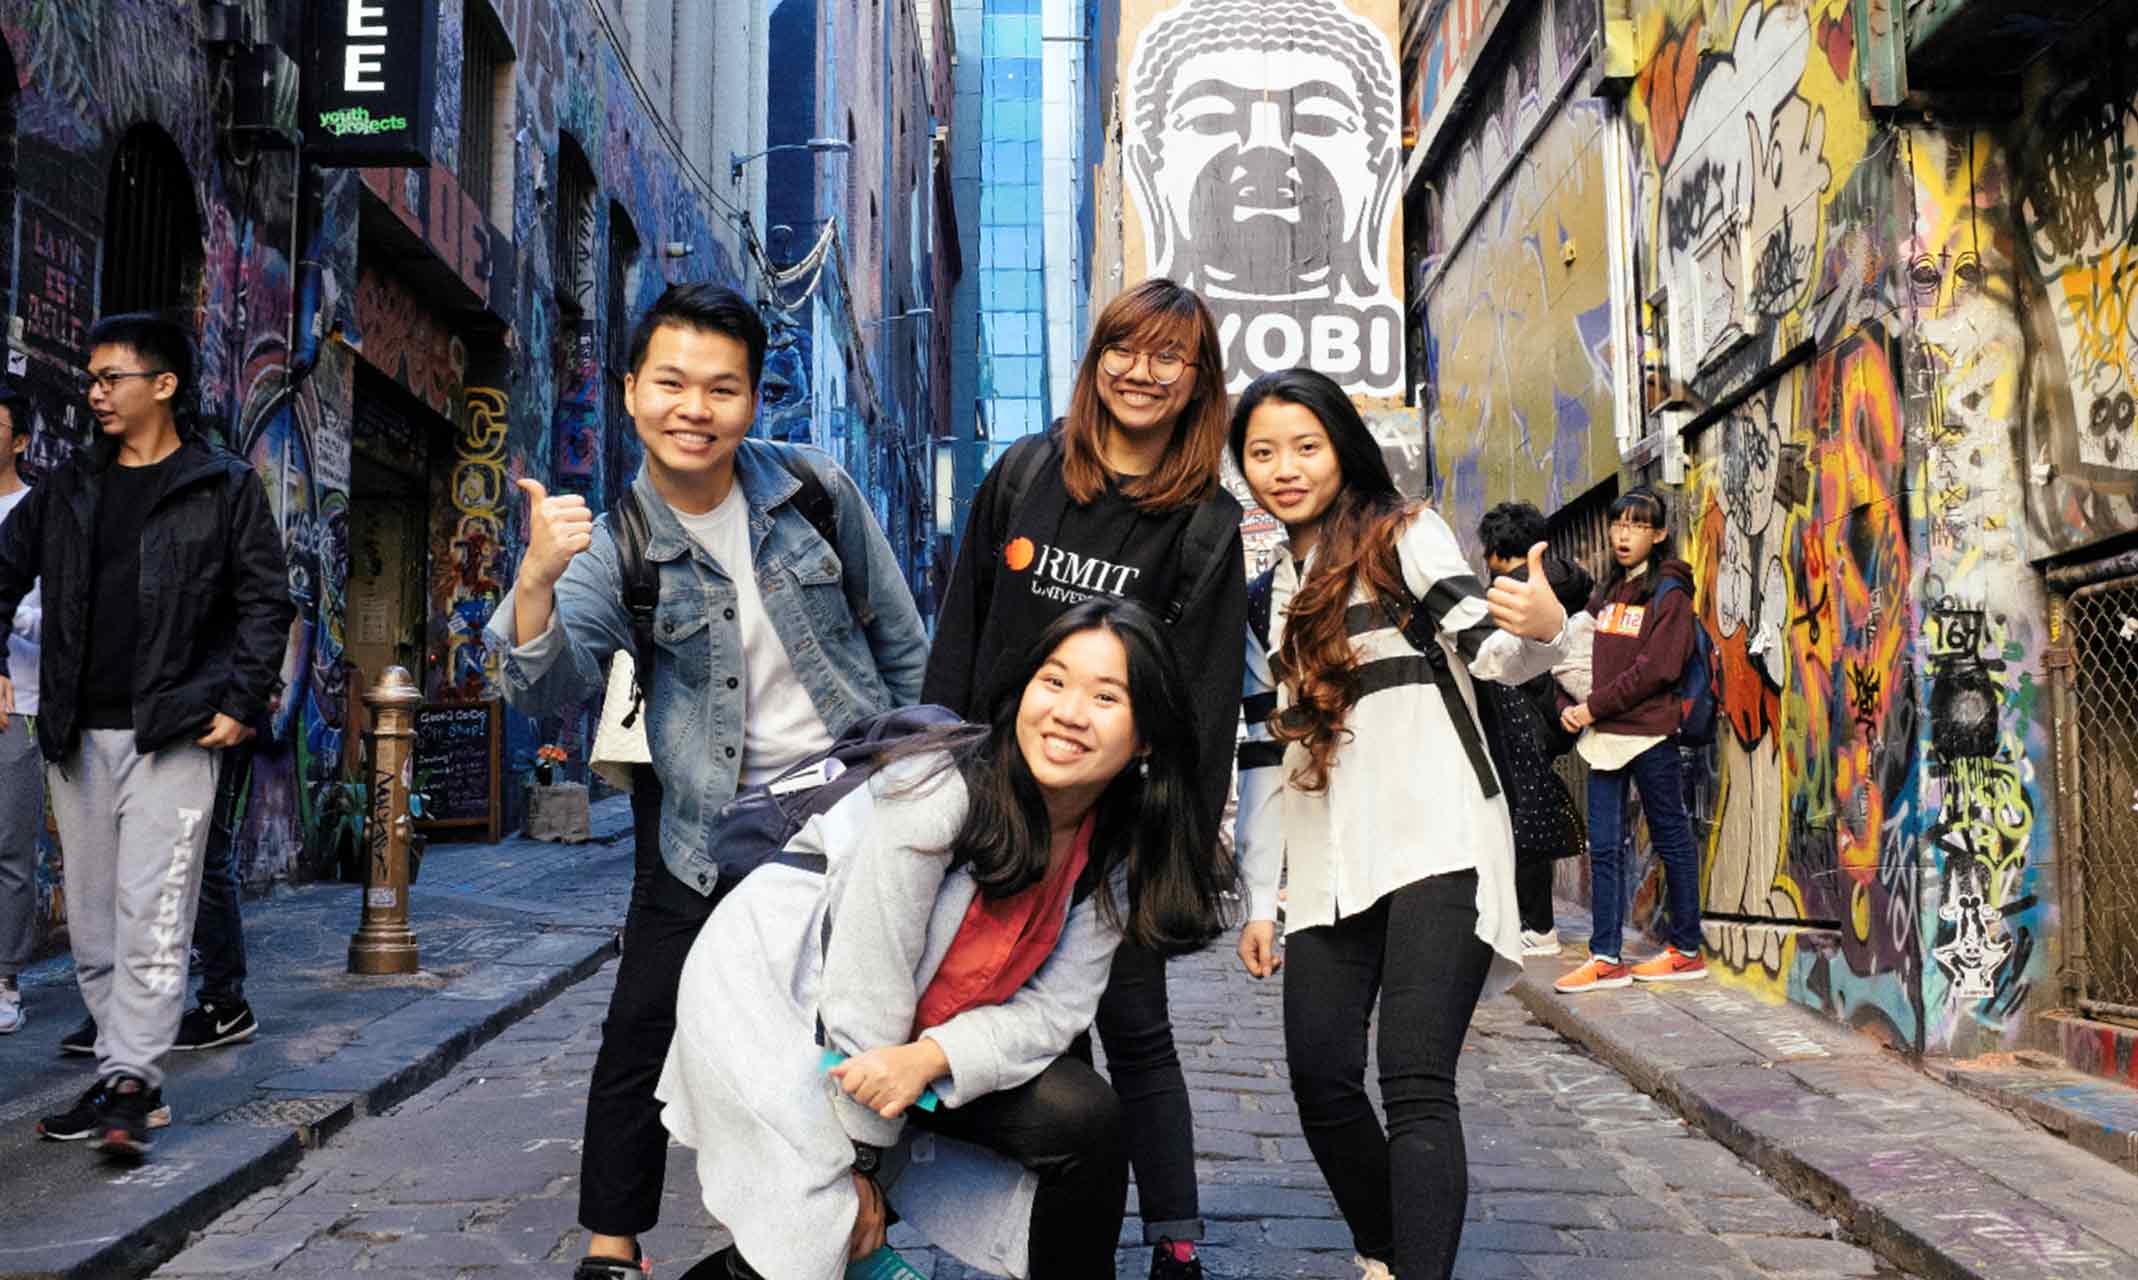 Students posing in classic Melbourne laneway